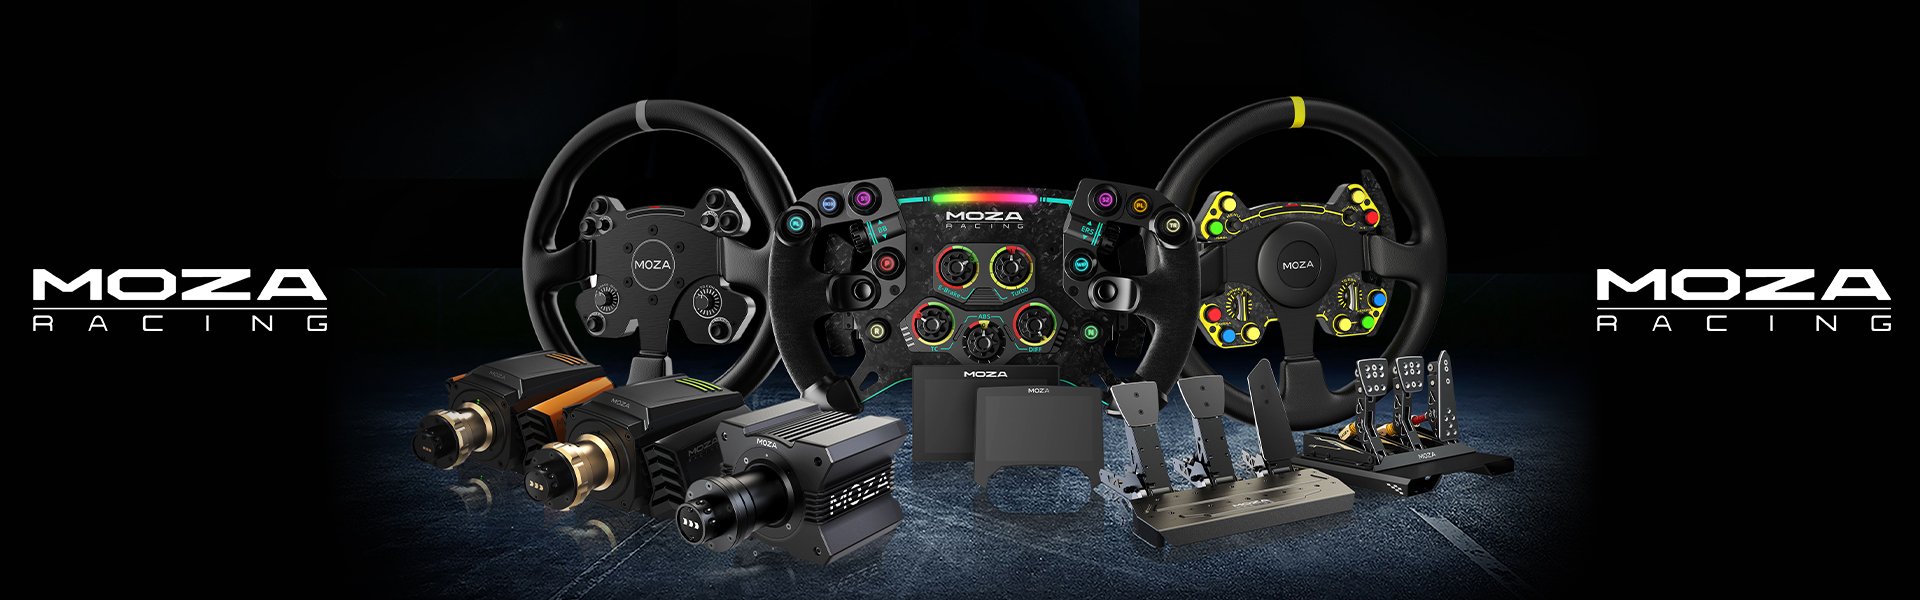 MOZA Racing R5 Direct Drive + ES Racing Wheel + SR-P 3 Pedals LoadCell -  Bundle 